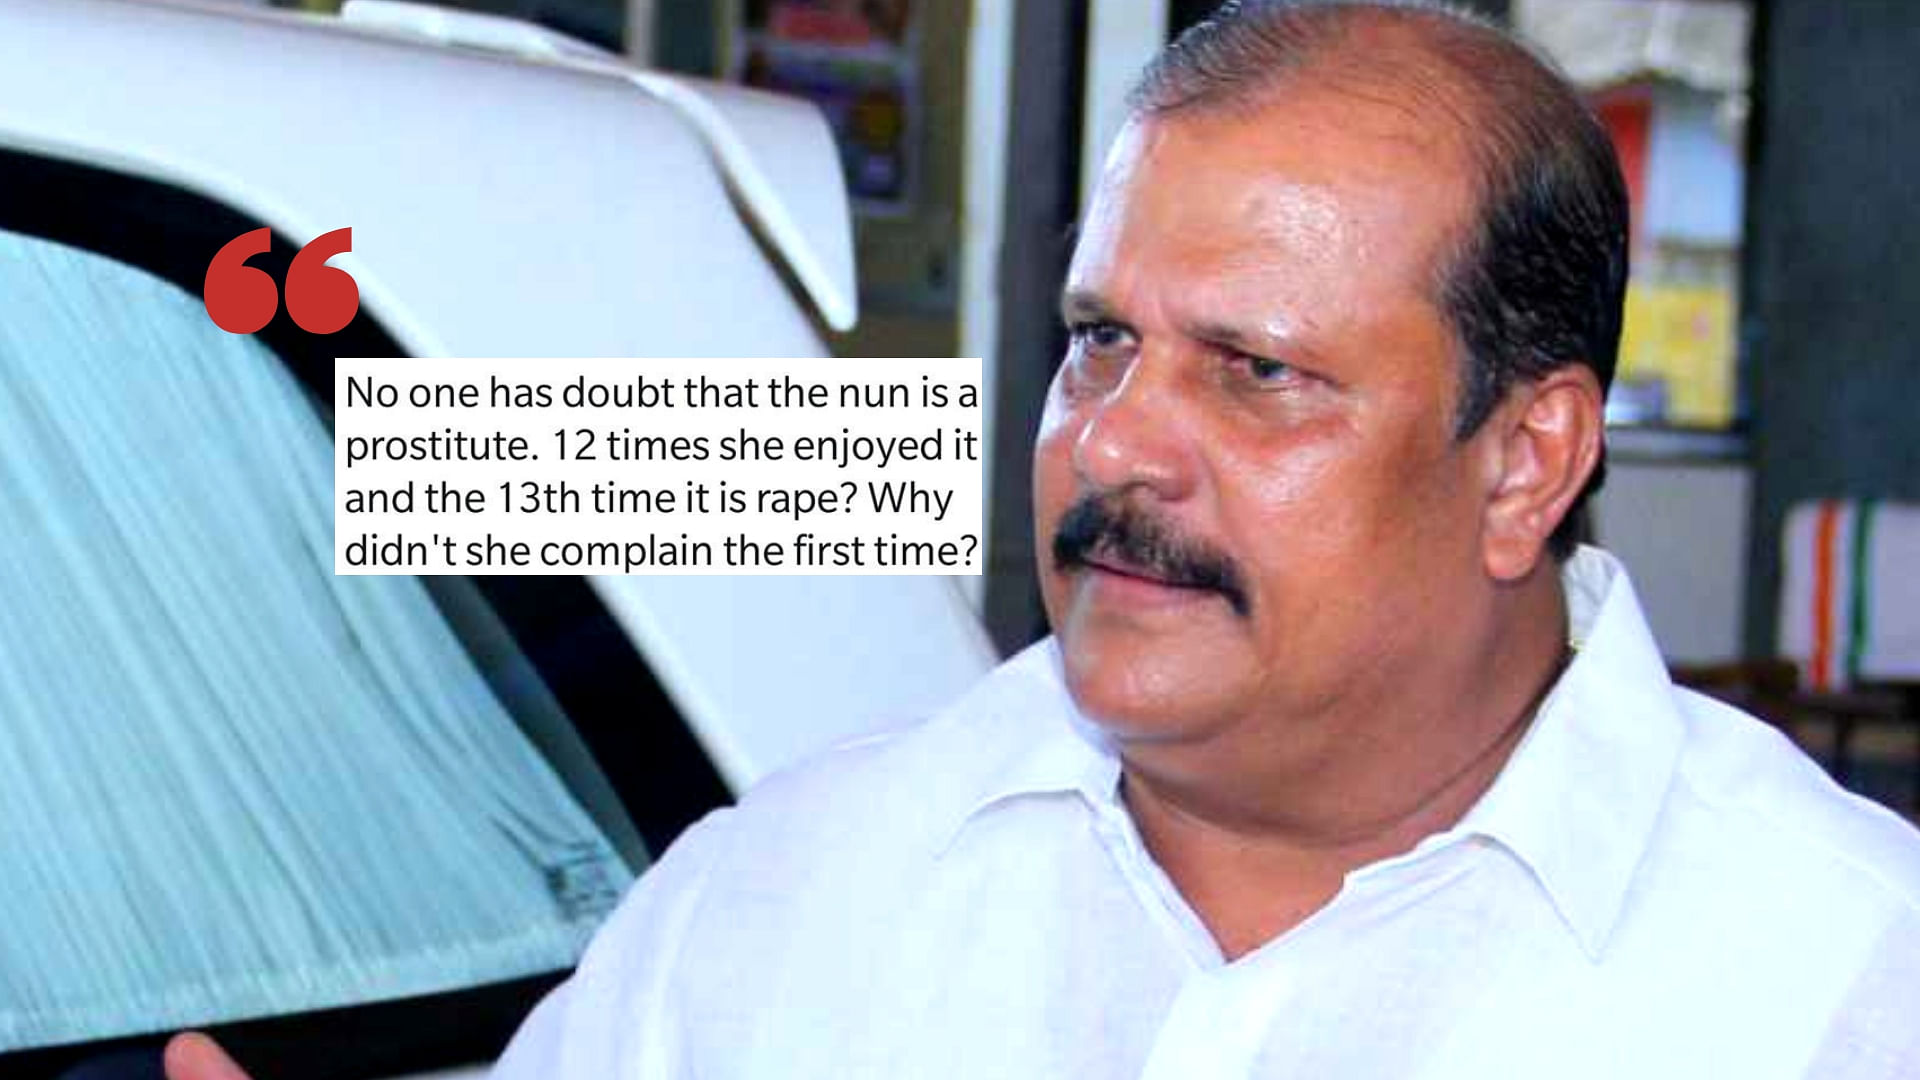 MLA PC George called the nun, who has alleged rape by a Bishop, a prostitute.